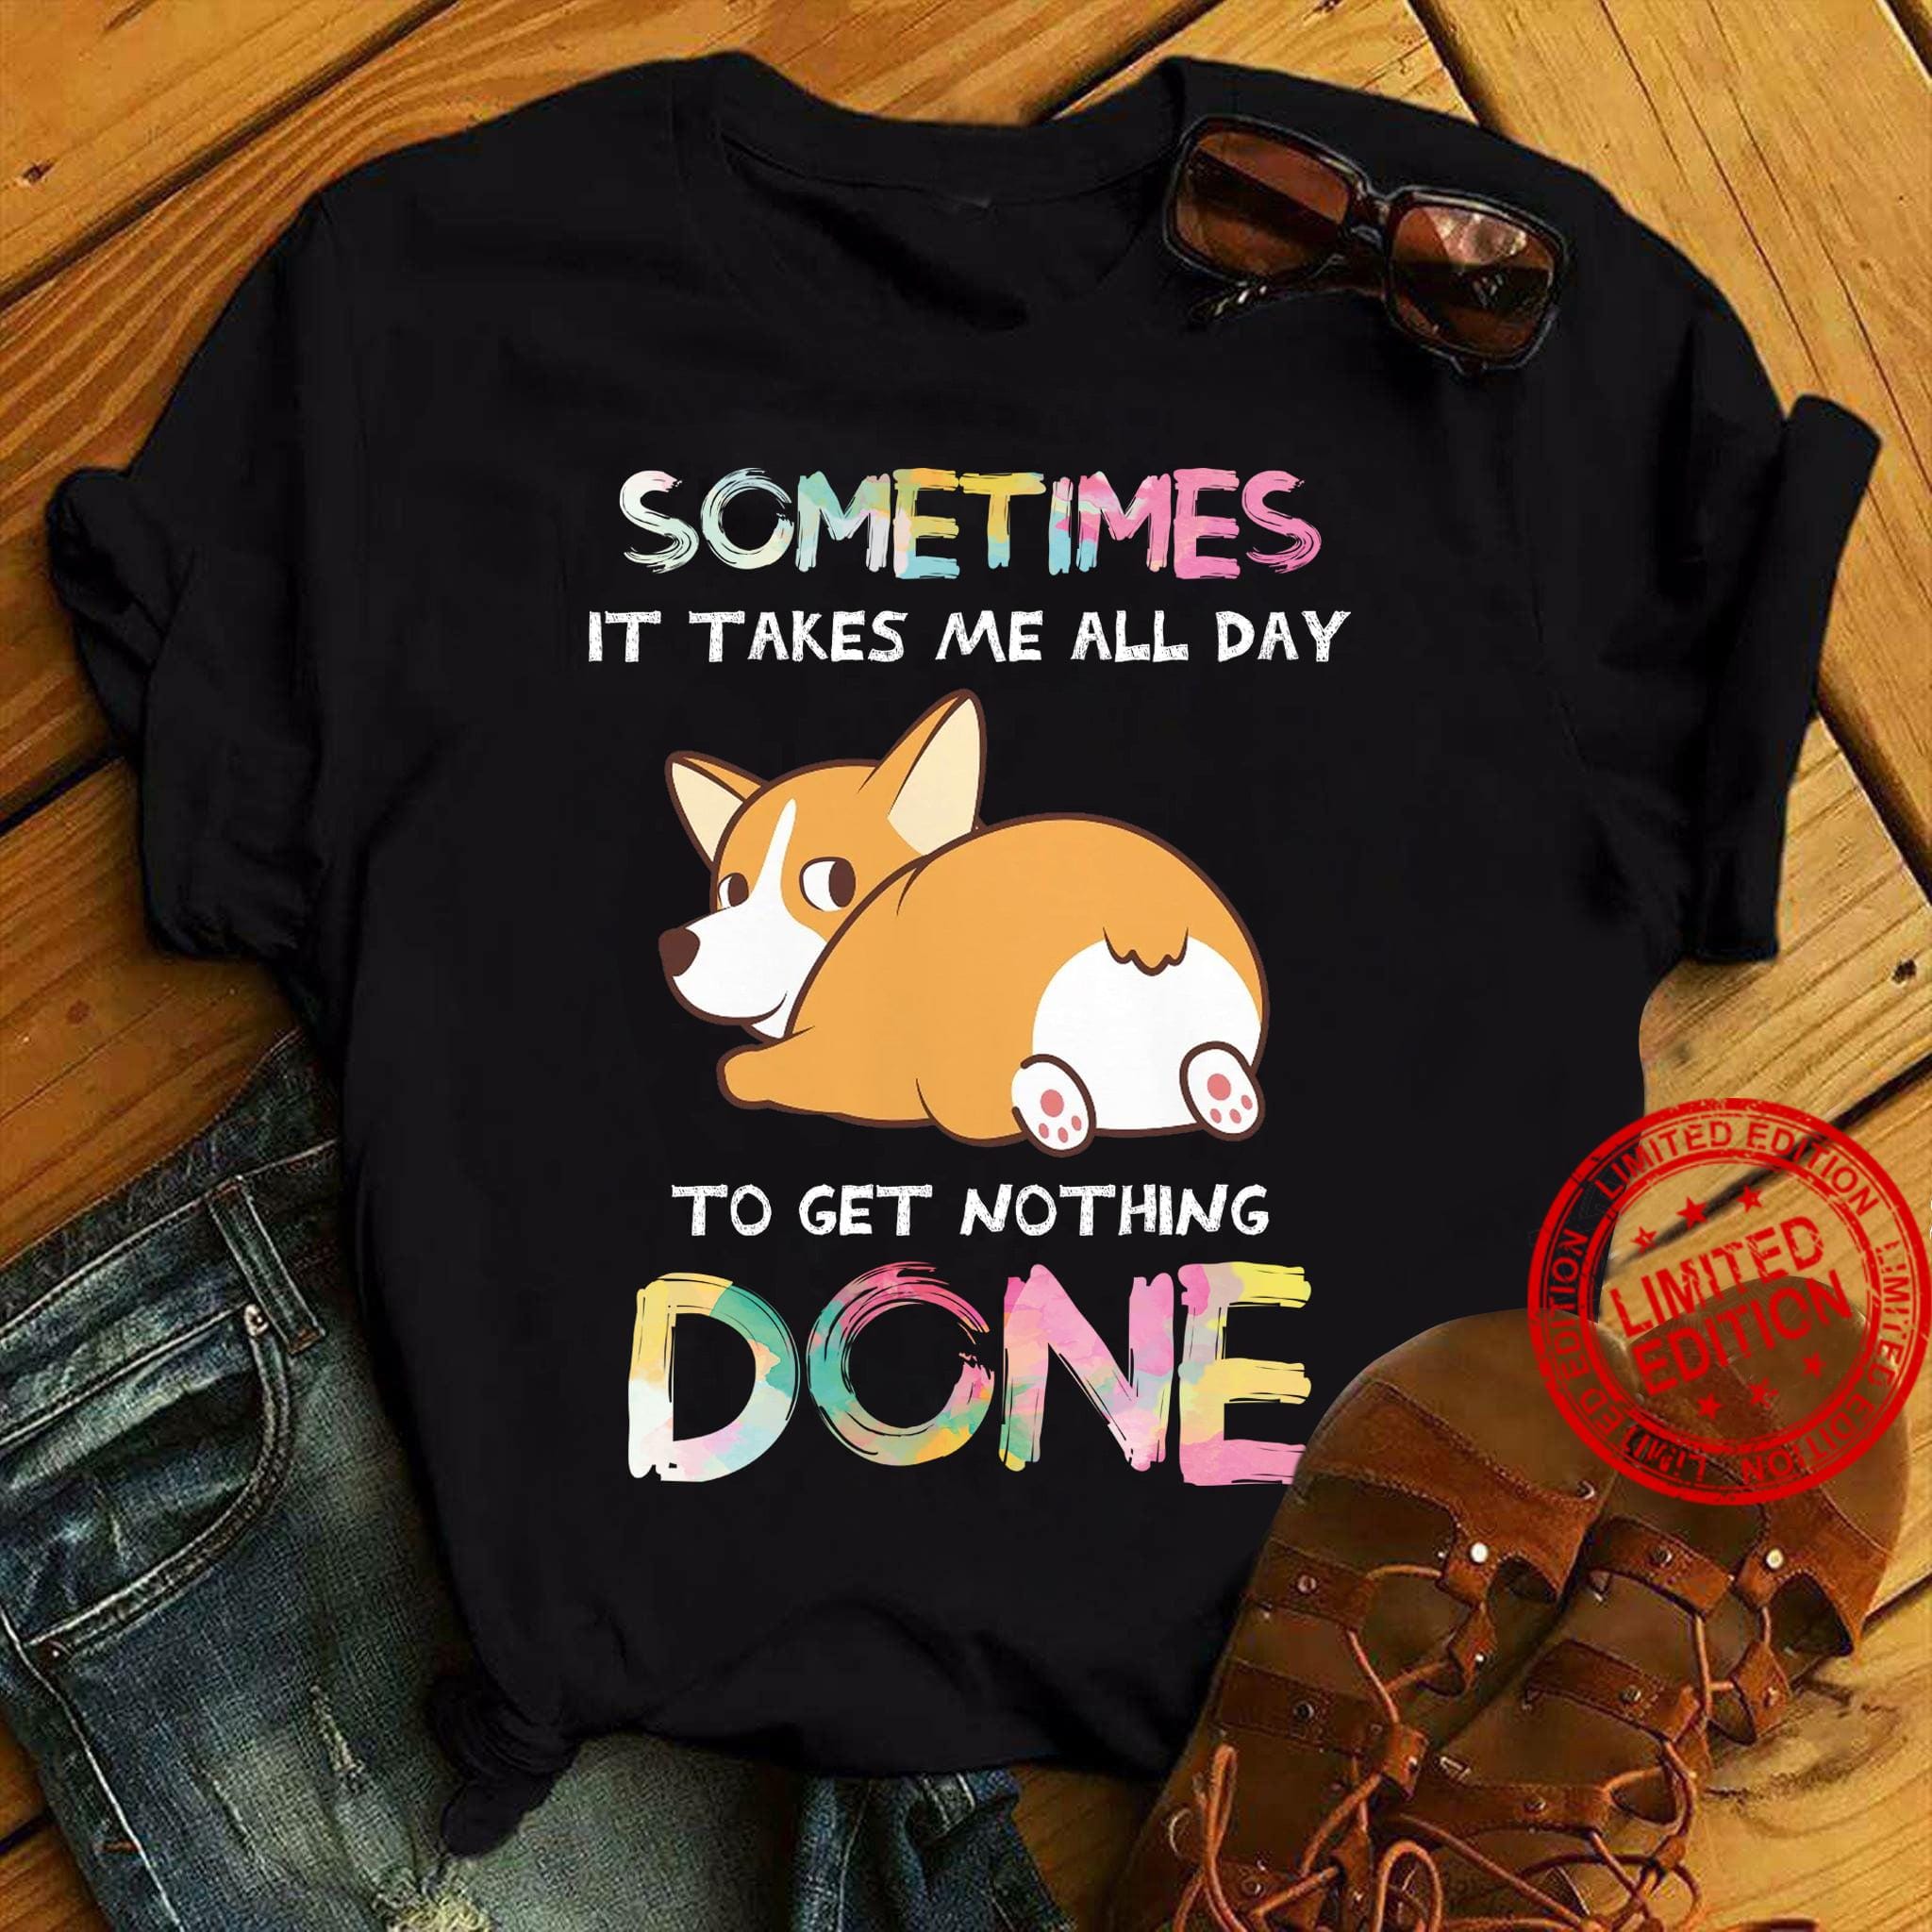 M143_sometimes it takes me all day to get nothing done Unisex T-Shirt